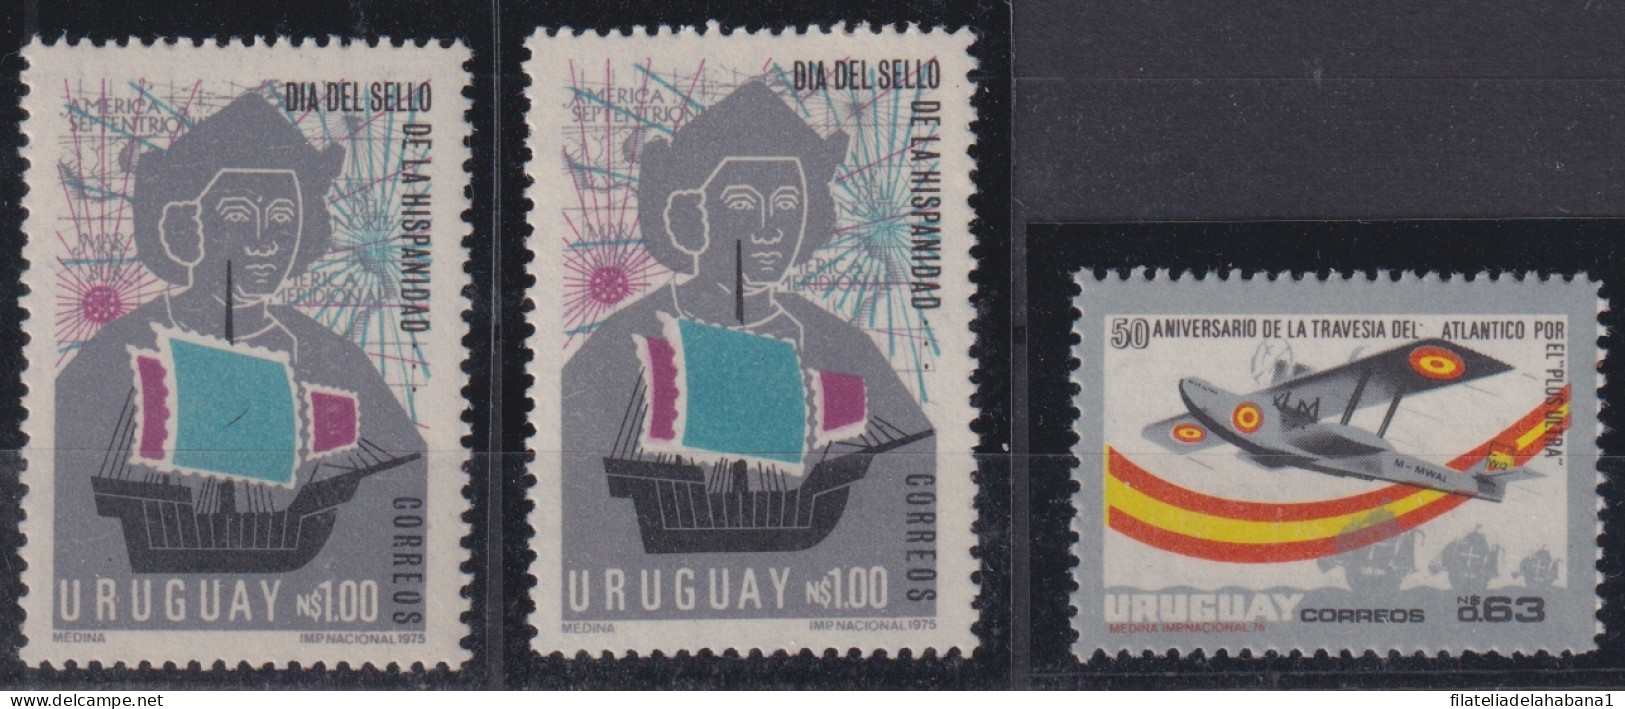 F-EX45189 URUGUAY MNH 1975 DISCOVERY OF AMERICA COLUMBUS PLUS ULTRA AIRPLANE.  - Christophe Colomb